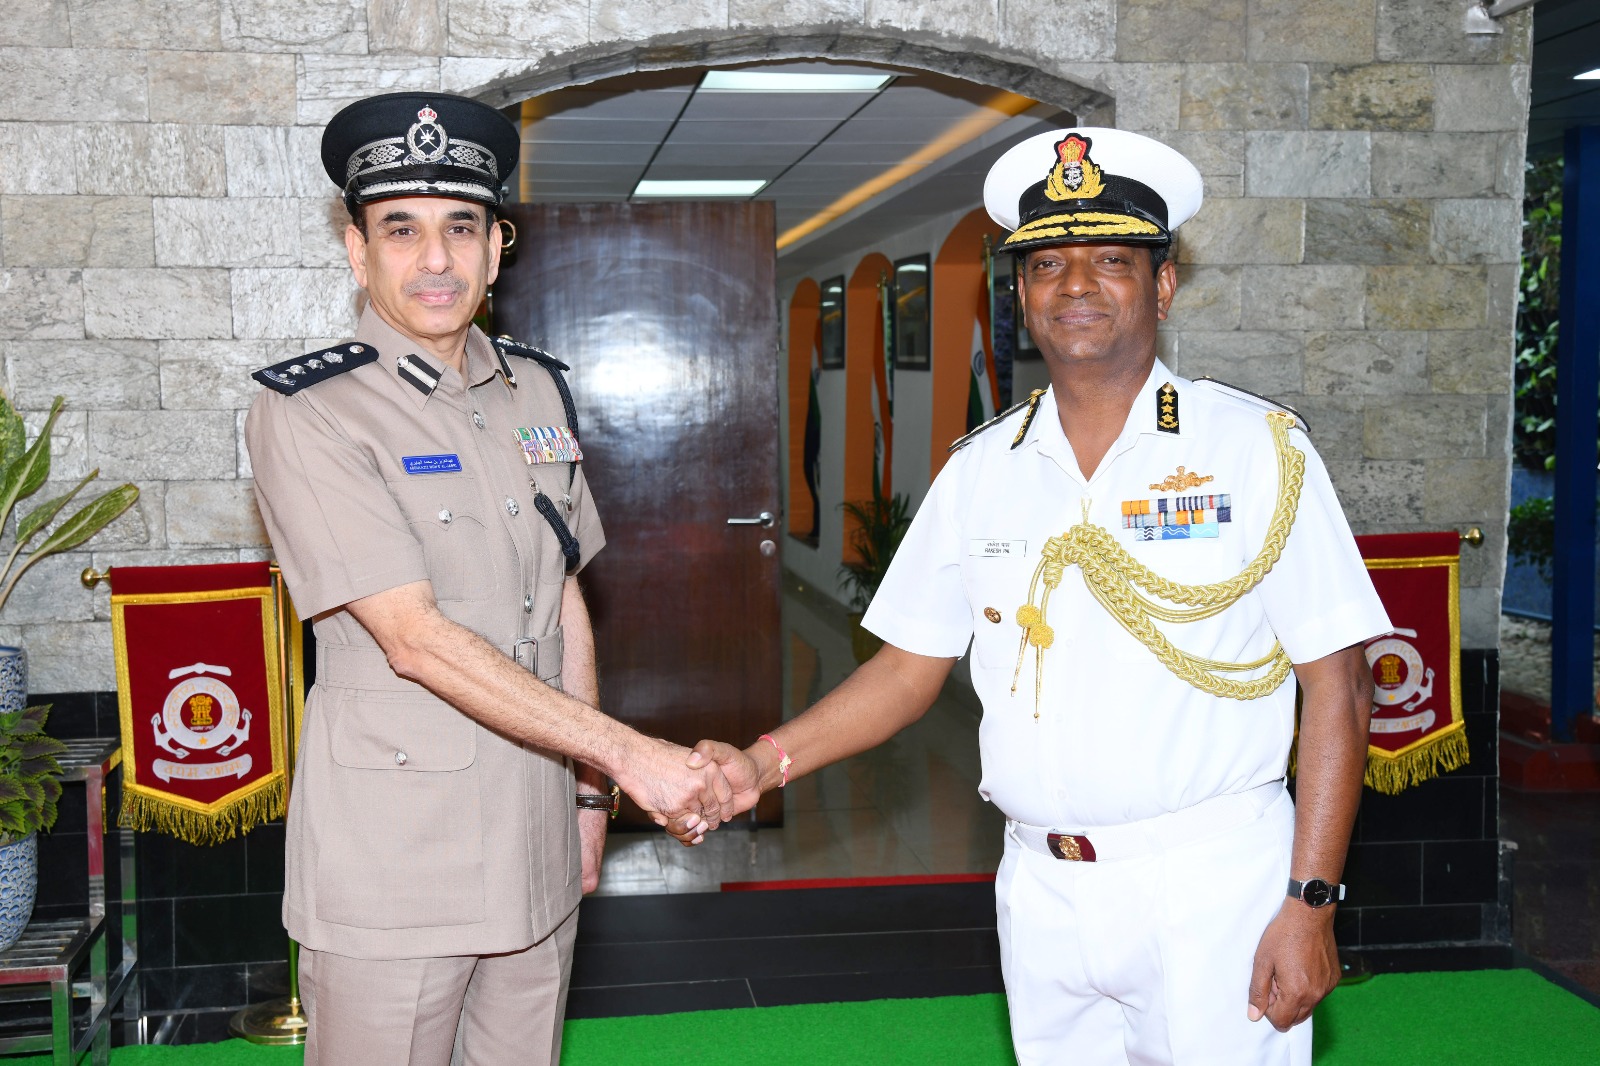 Indian Coast Guard & Royal Oman Police Coast Guard officials meet in New Delhi to combat transnational illegal activities at sea & promote regional cooperation